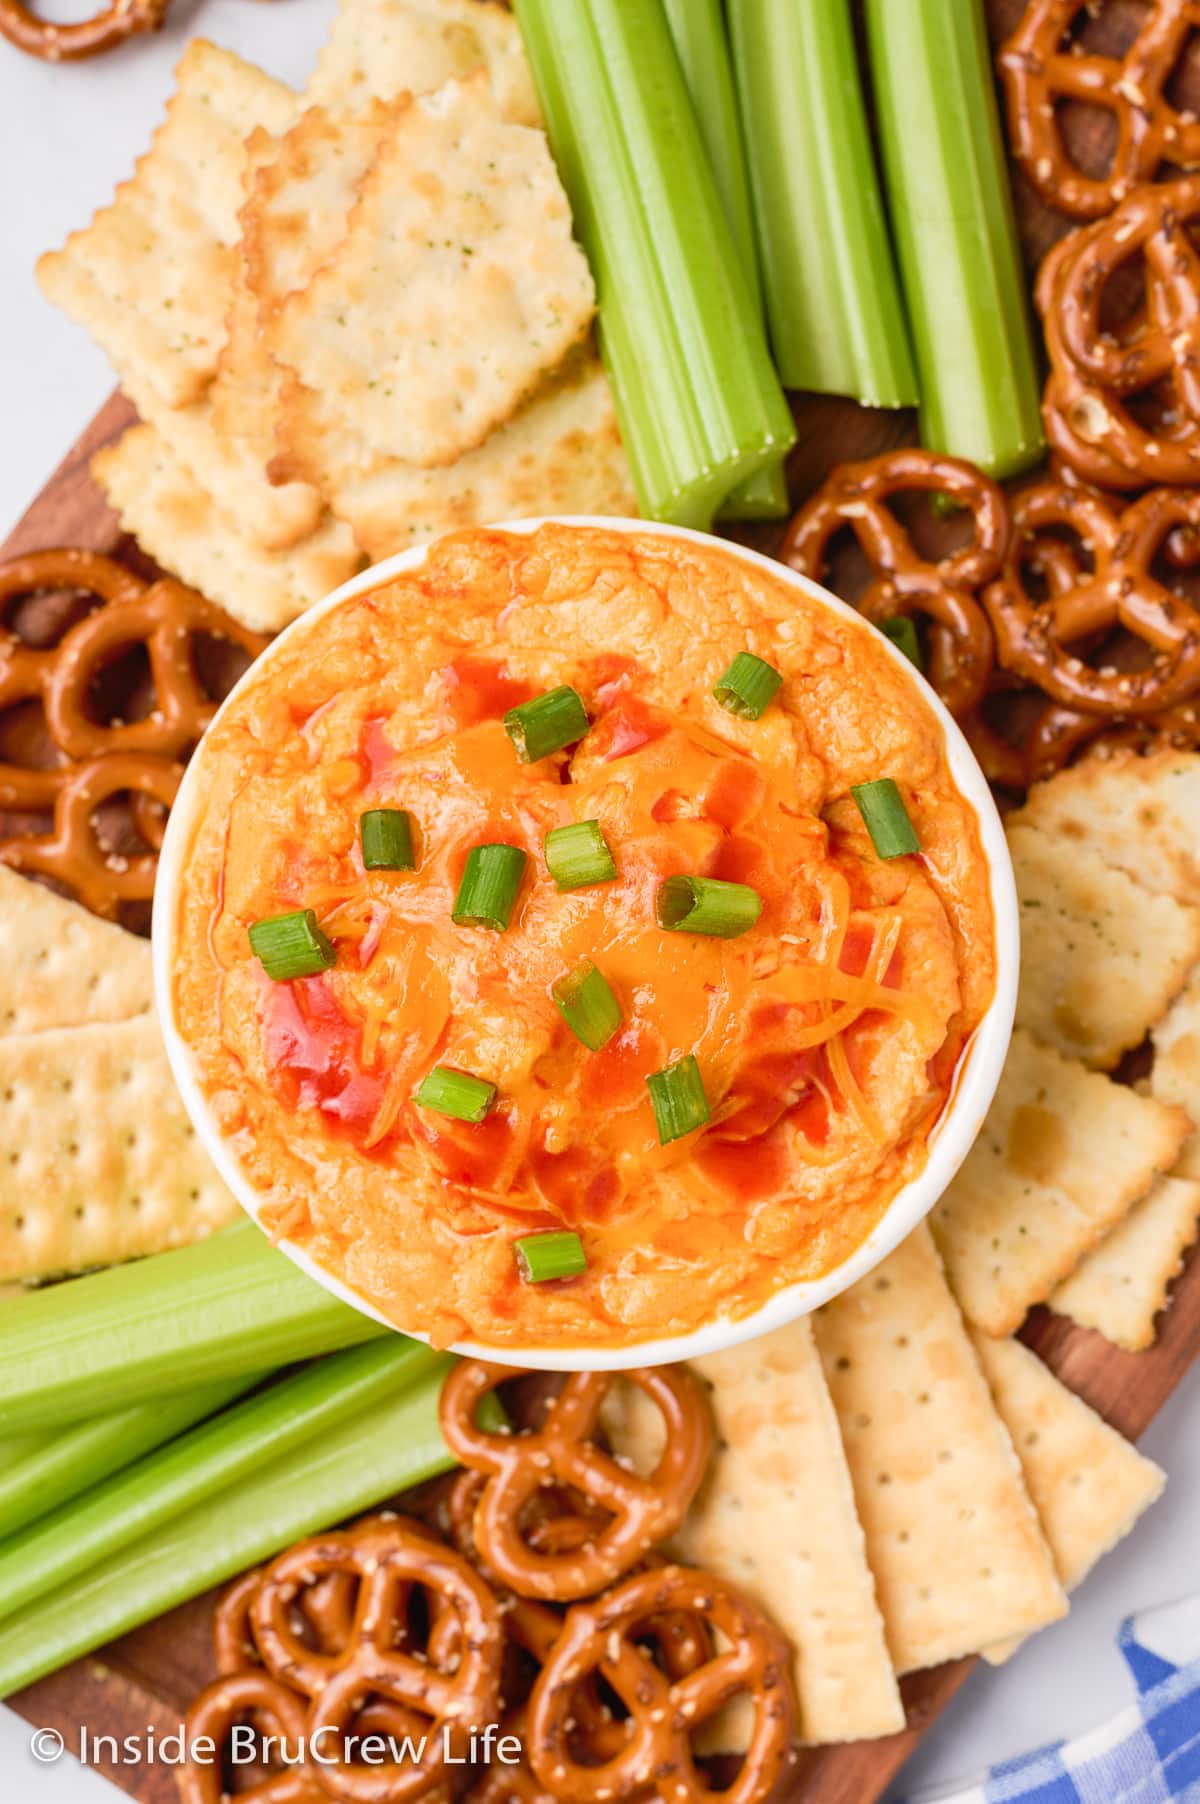 A cheesy dip bowl on a tray with pretzels, crackers, and celery.